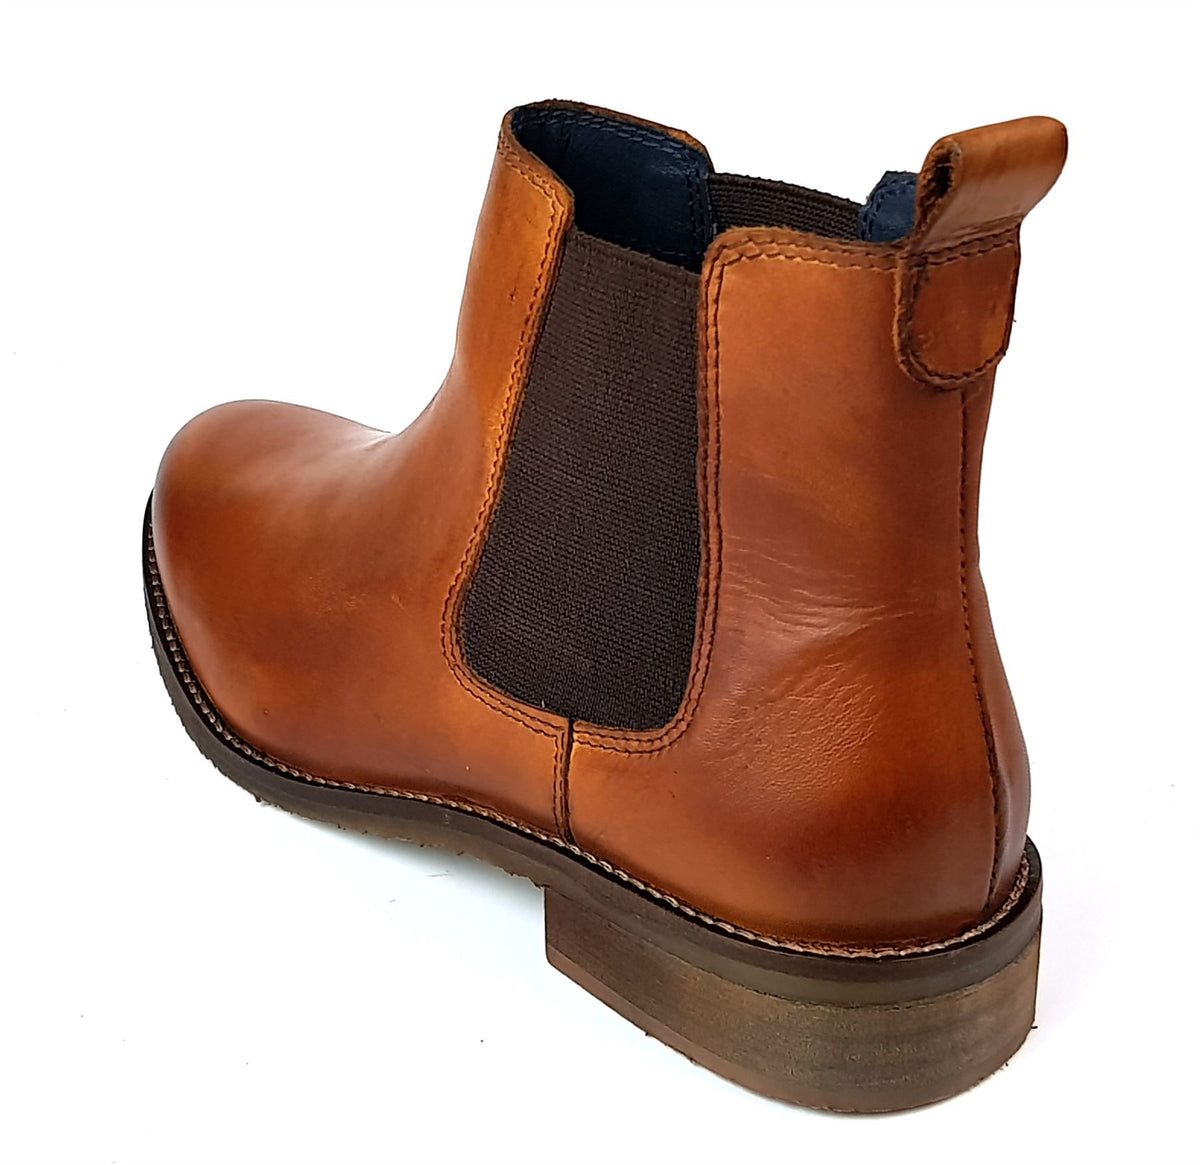 Frank James Aintree Women's Leather Pull On Chelsea Boots